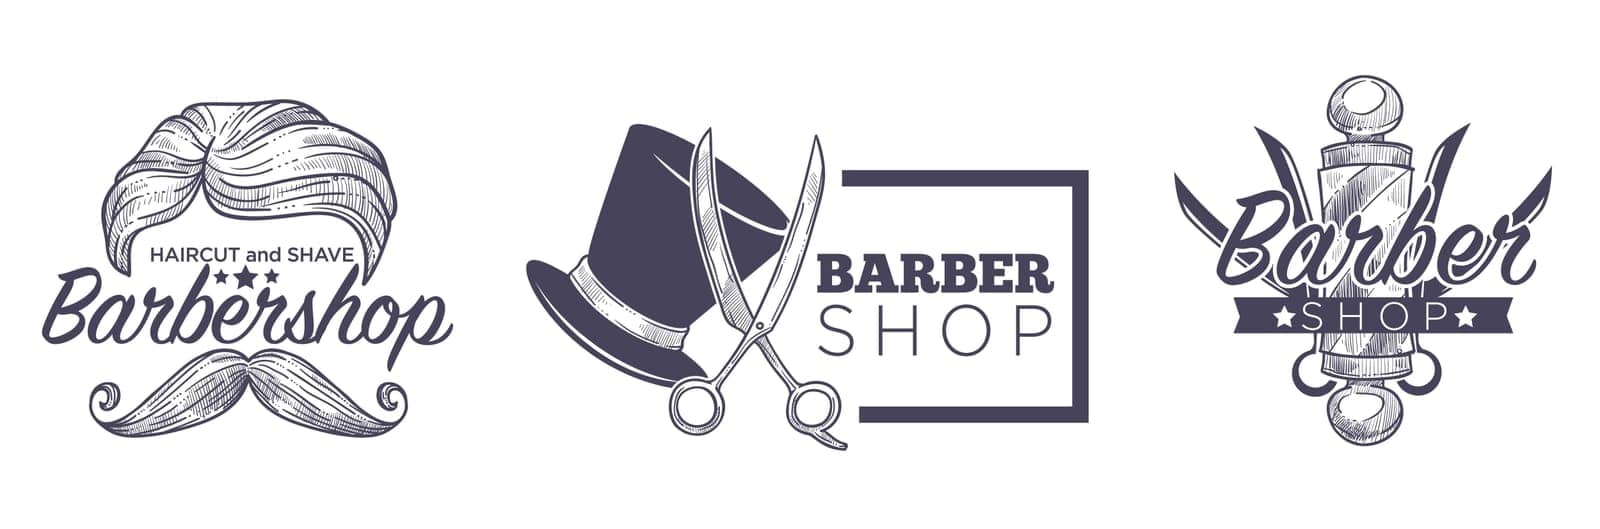 Haircut and shave for men, barber shop logotypes by Sonulkaster